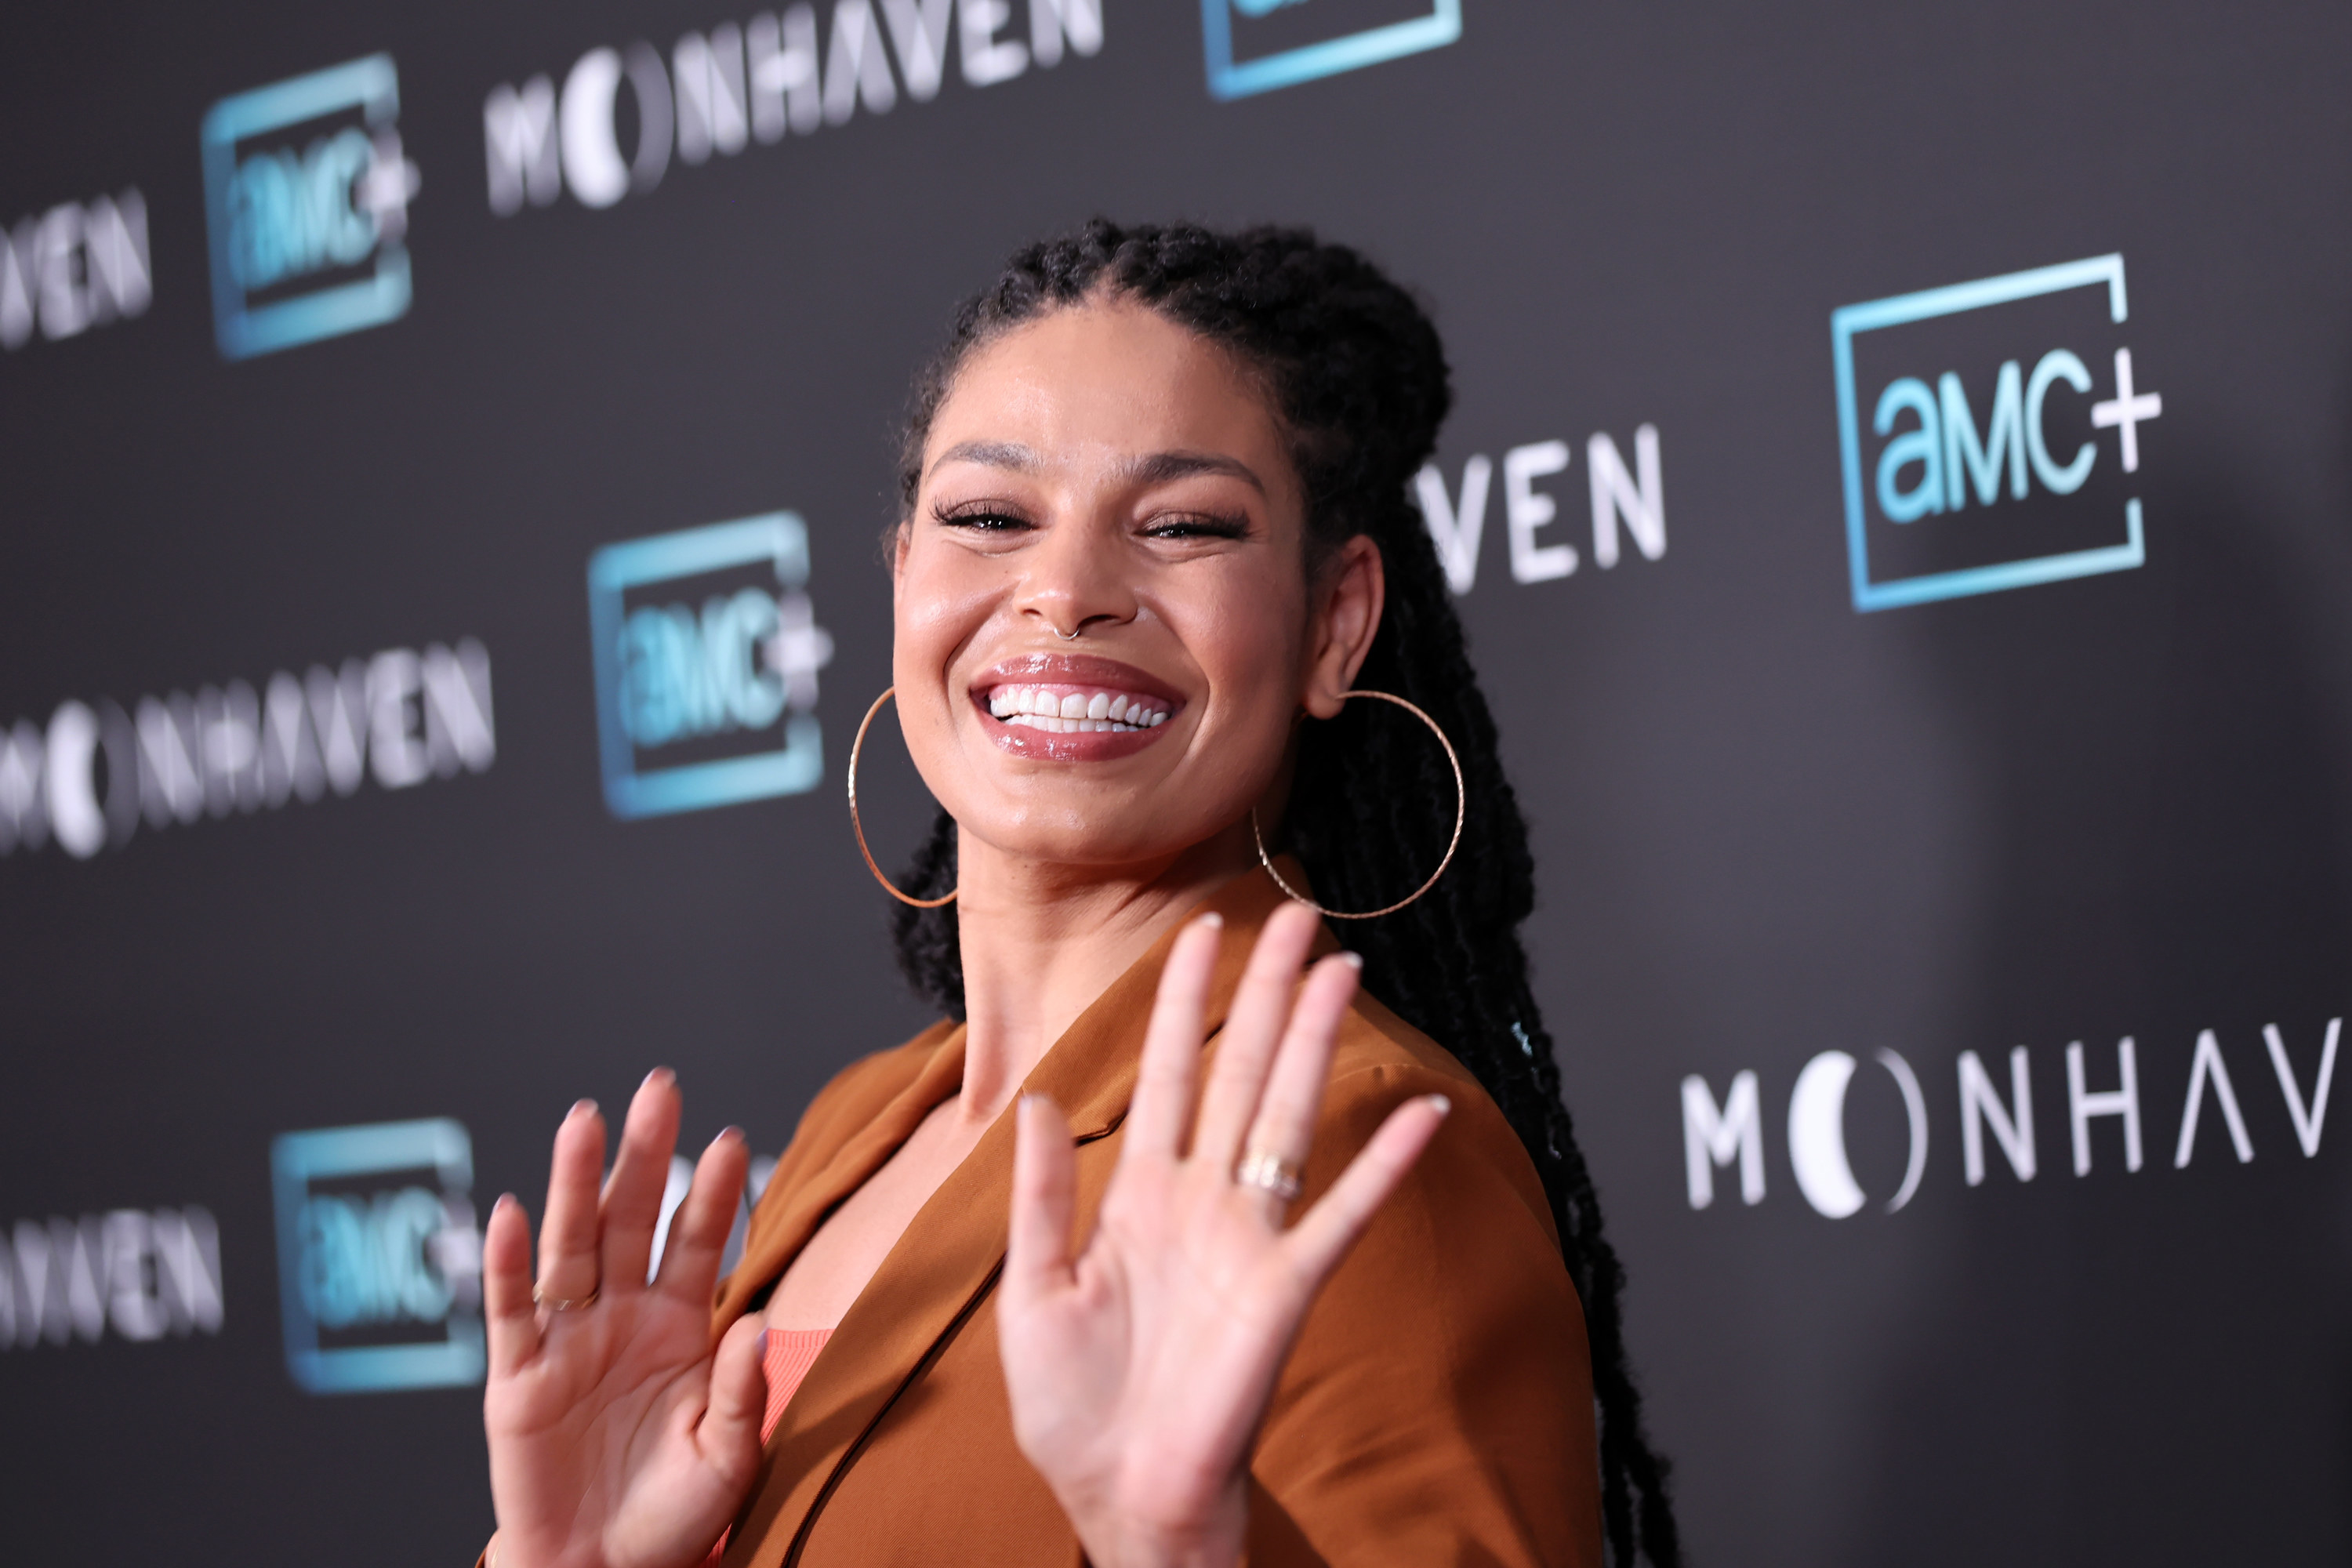 Jordin smiling widely as she waves at a red carpet event